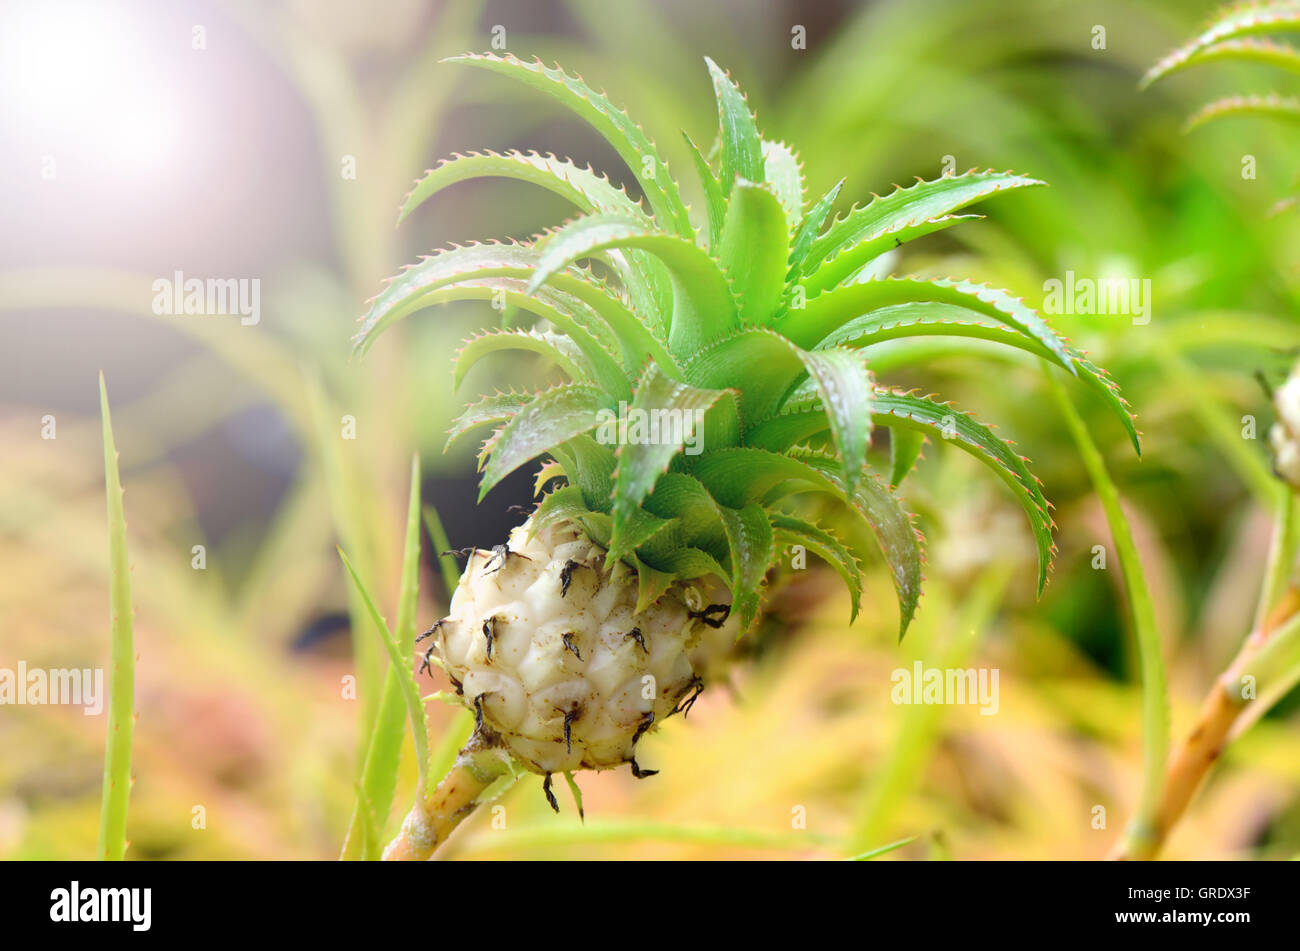 Pot pineapple on natural background. Stock Photo